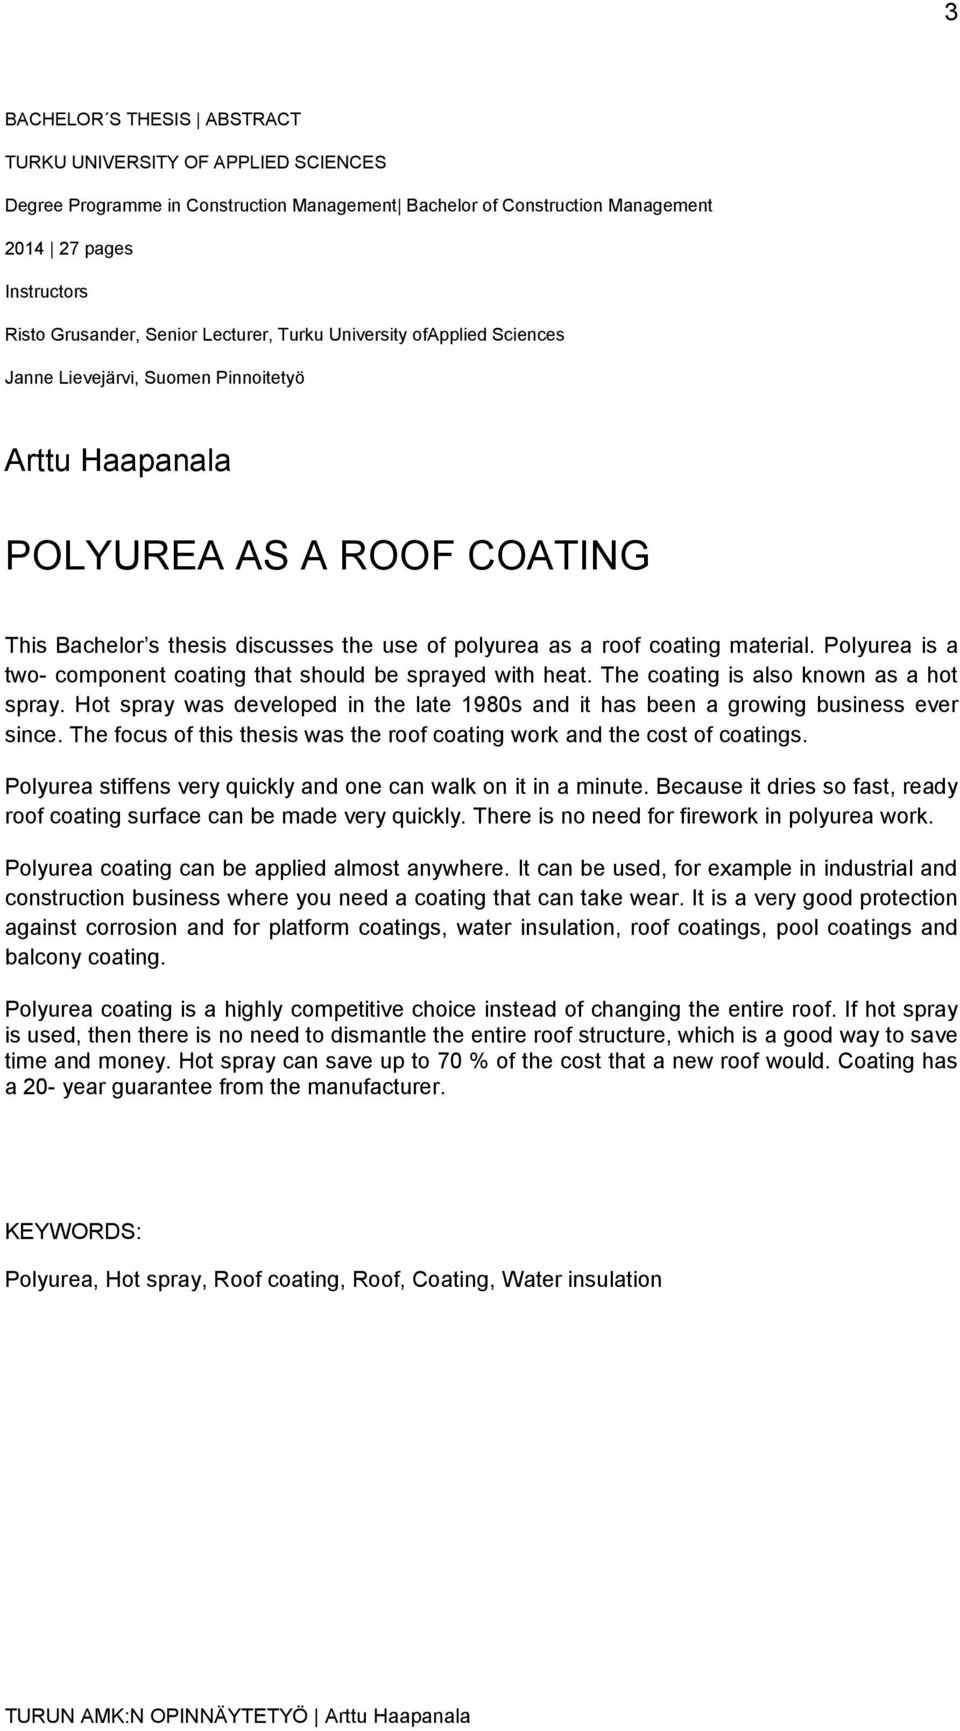 material. Polyurea is a two- component coating that should be sprayed with heat. The coating is also known as a hot spray.